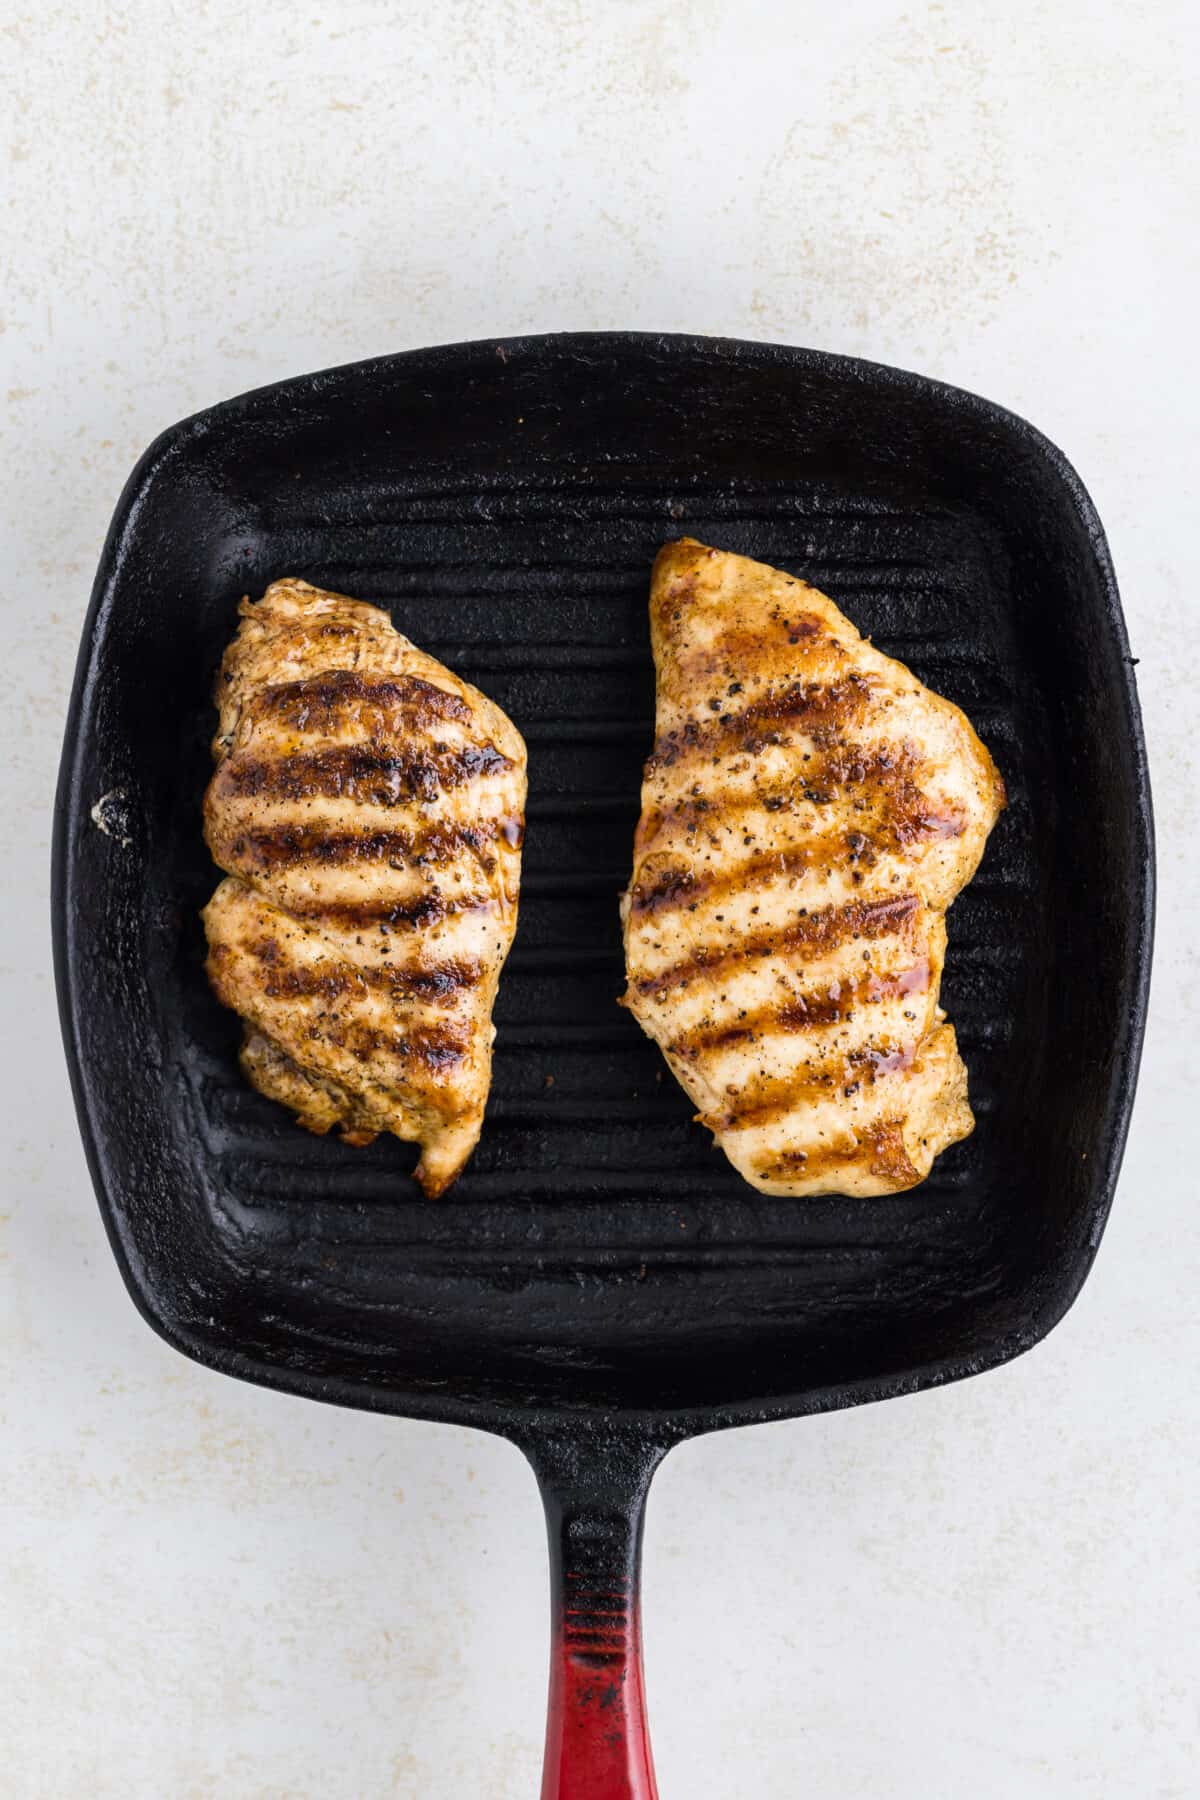 cooking the chicken breast on the grill pan.